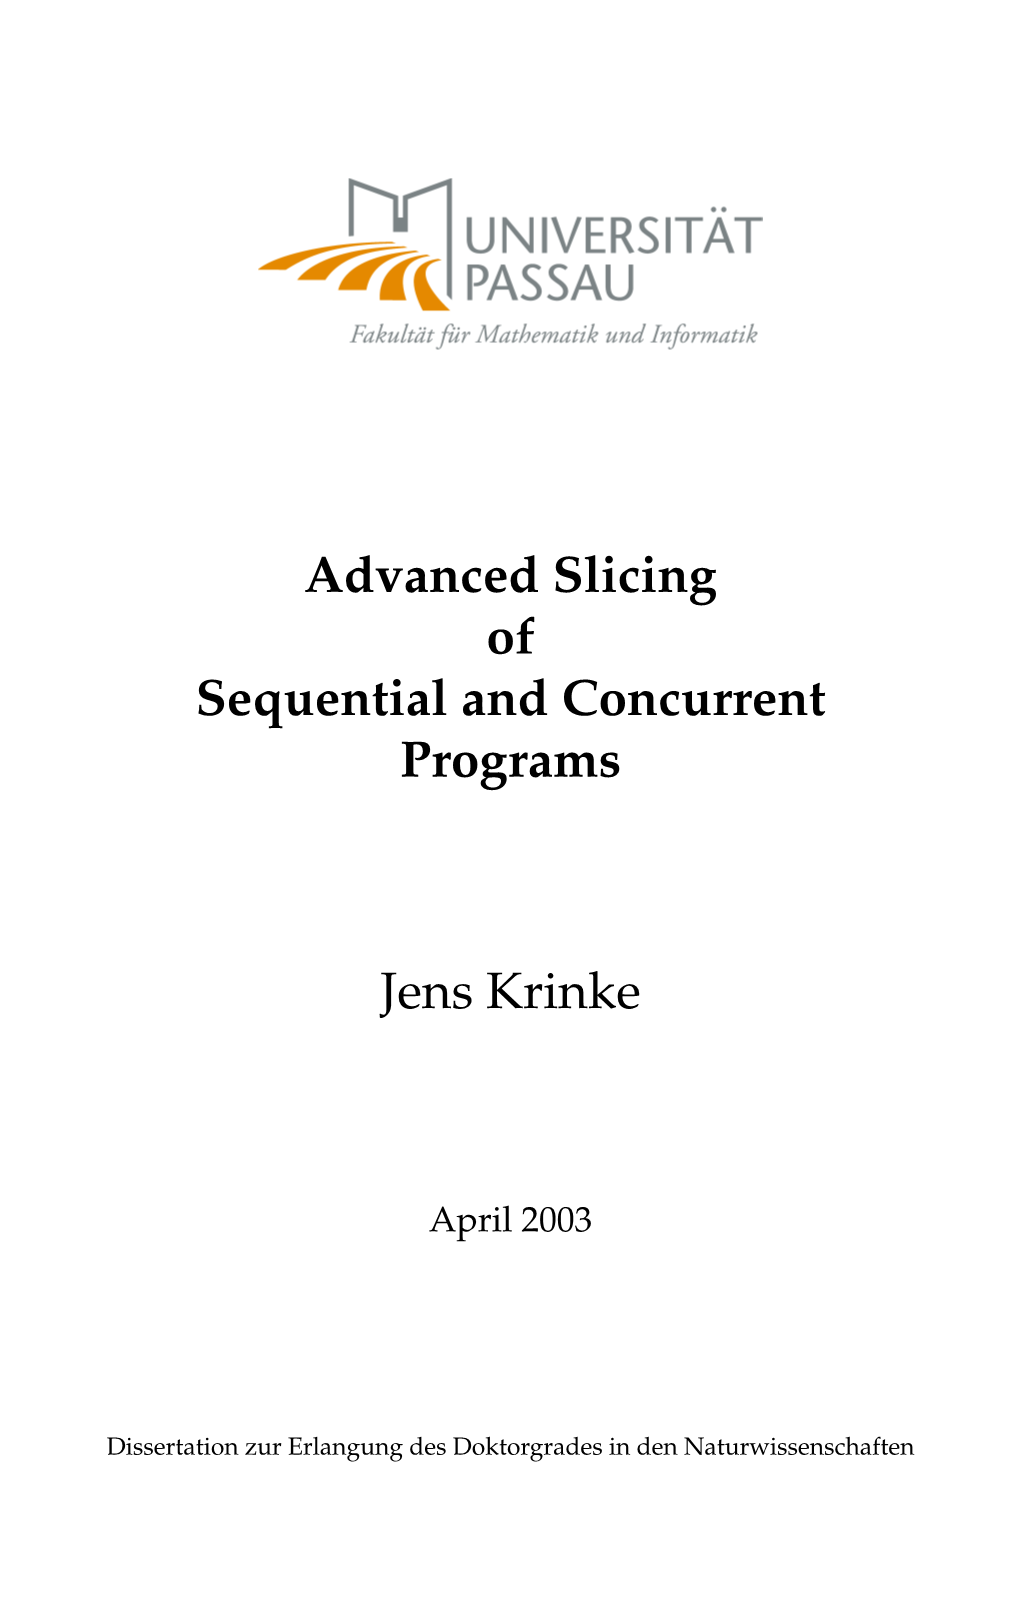 Advanced Slicing of Sequential and Concurrent Programs Jens Krinke